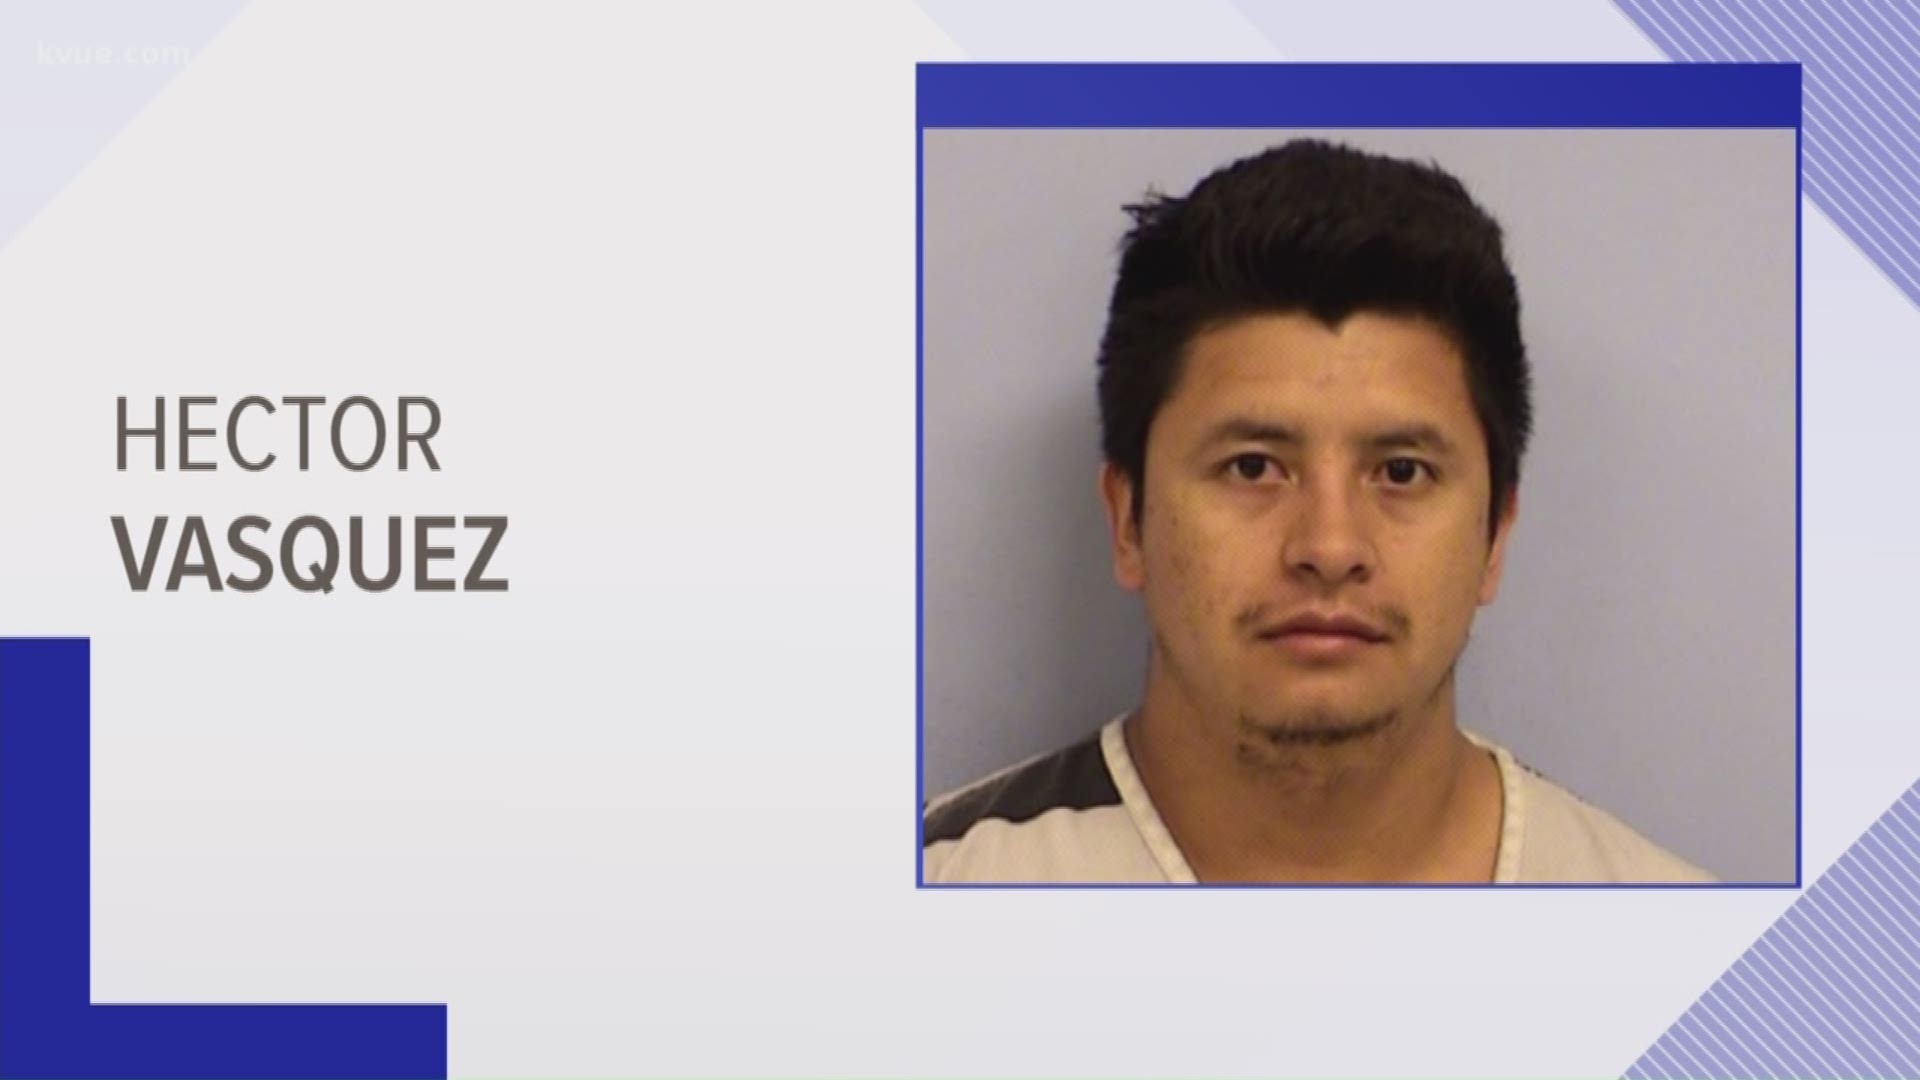 A 26-year-old Austin man is charged with invasive visual recording after police say he tried to record videos under women's skirts on South Congress over the weekend.